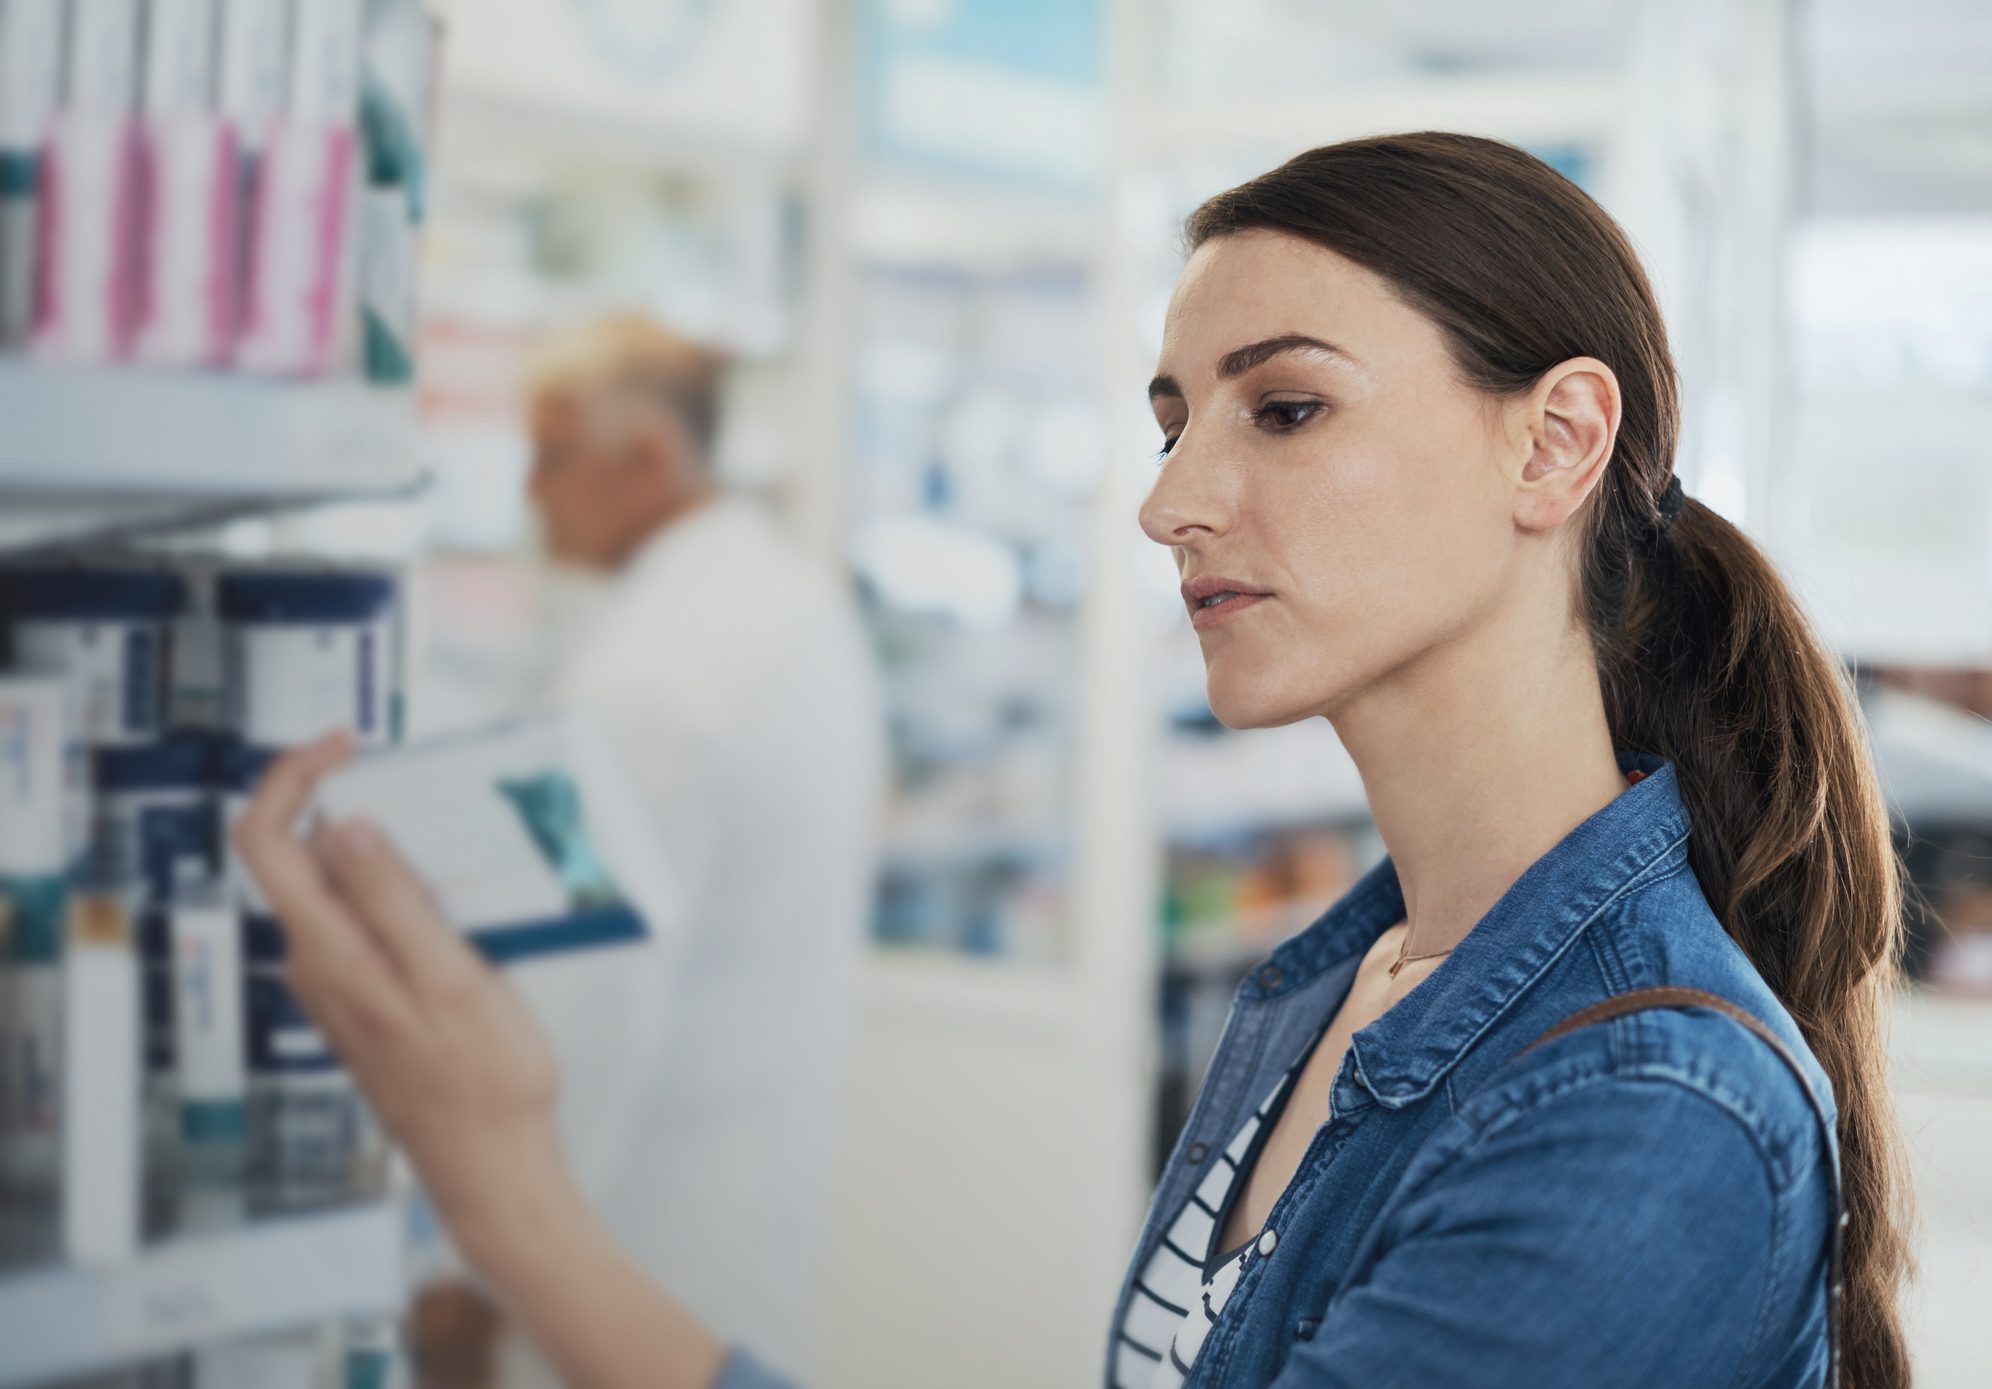 Shot of a young woman browsing the shelves of a pharmacy